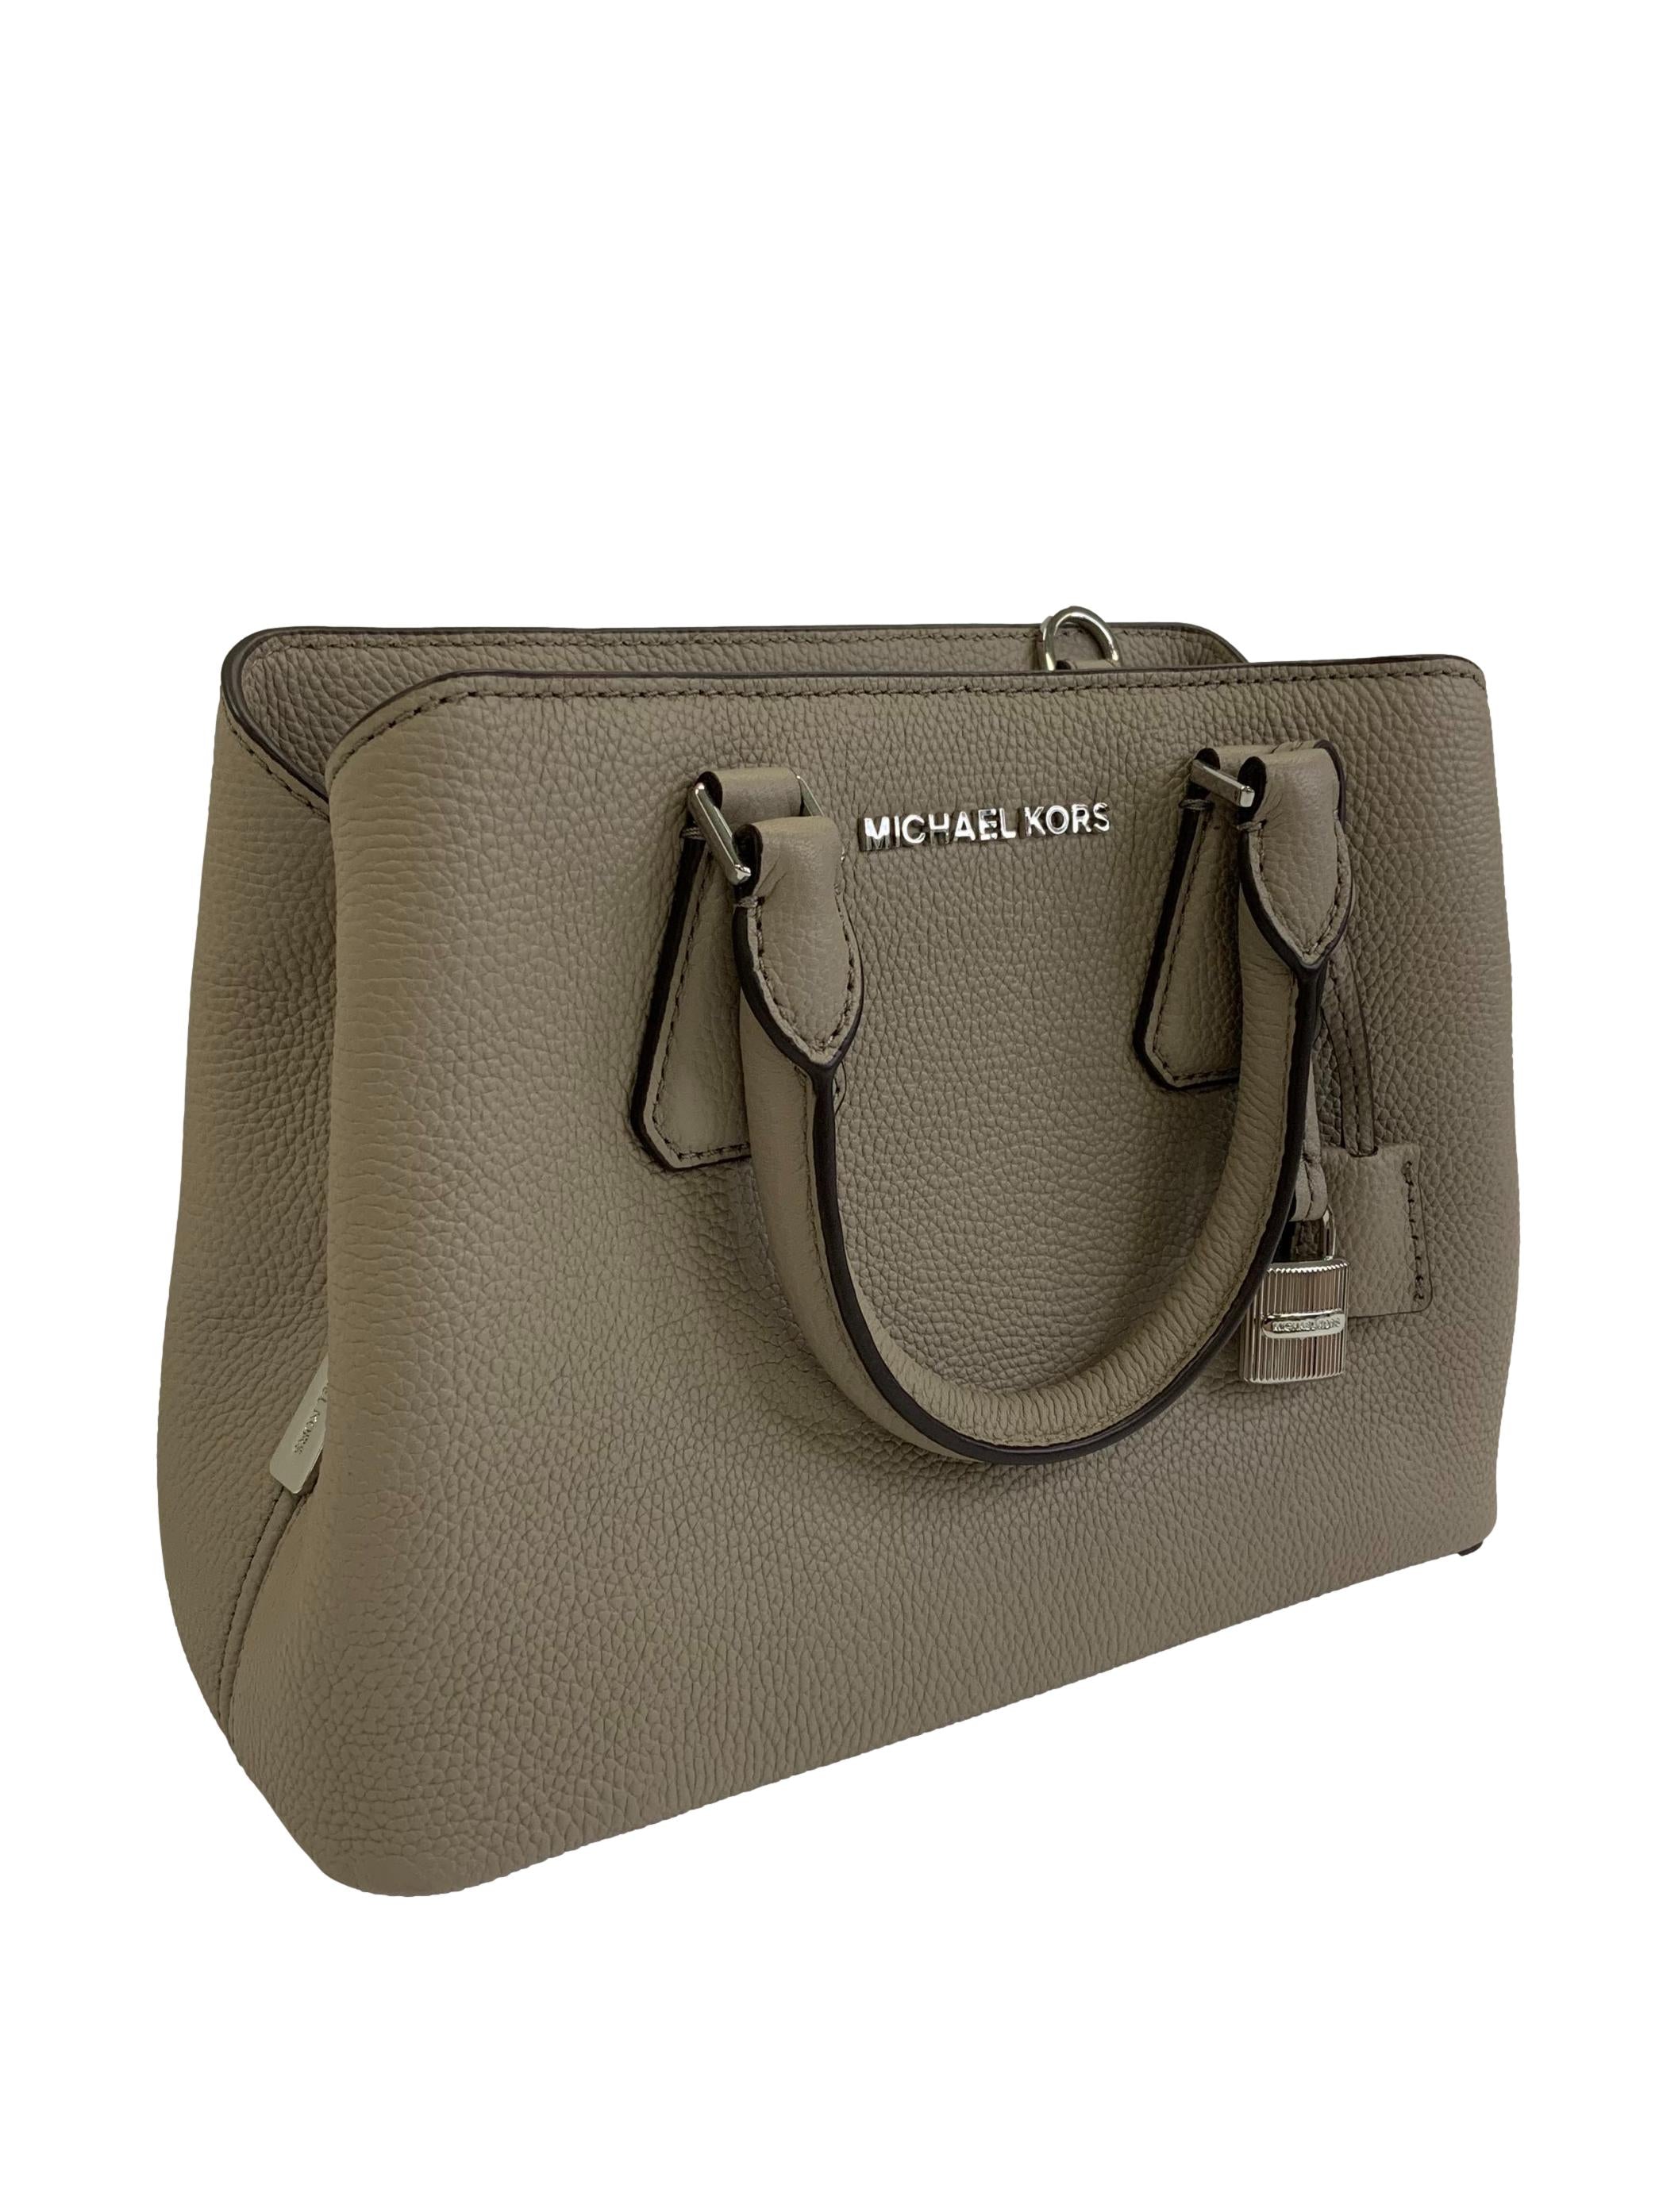 Camille Leather Satchel